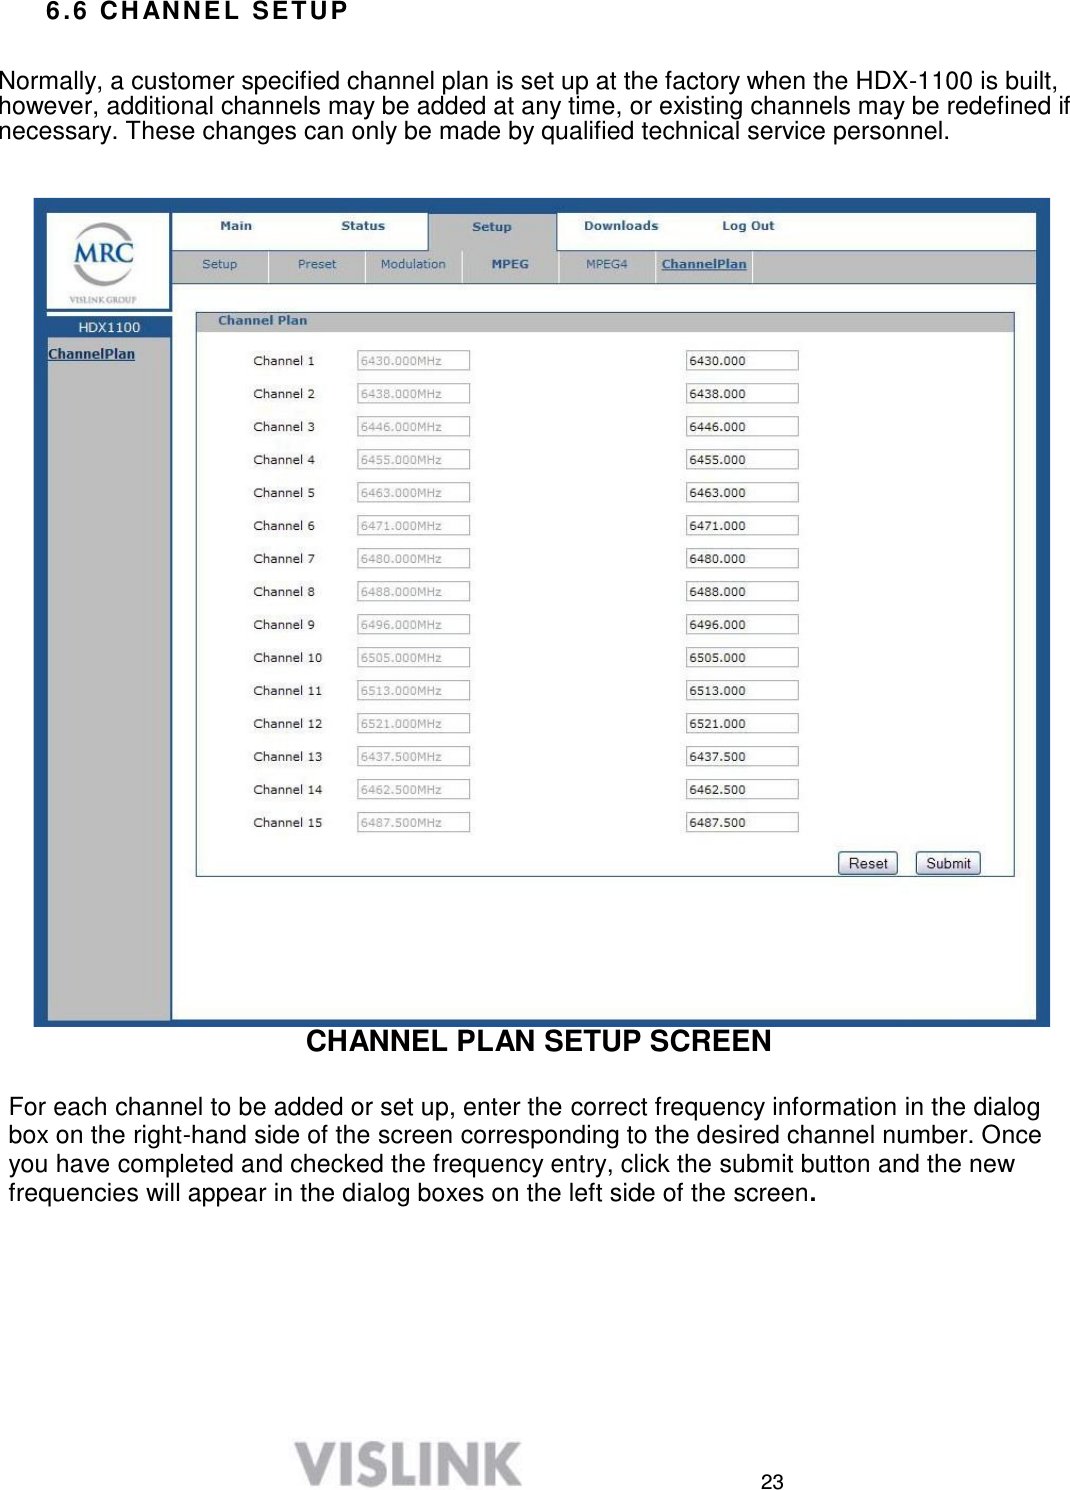  23  6 . 6  C H A N N E L  S E T U P   Normally, a customer specified channel plan is set up at the factory when the HDX-1100 is built, however, additional channels may be added at any time, or existing channels may be redefined if necessary. These changes can only be made by qualified technical service personnel.                                           CHANNEL PLAN SETUP SCREEN   For each channel to be added or set up, enter the correct frequency information in the dialog box on the right-hand side of the screen corresponding to the desired channel number. Once you have completed and checked the frequency entry, click the submit button and the new frequencies will appear in the dialog boxes on the left side of the screen. 